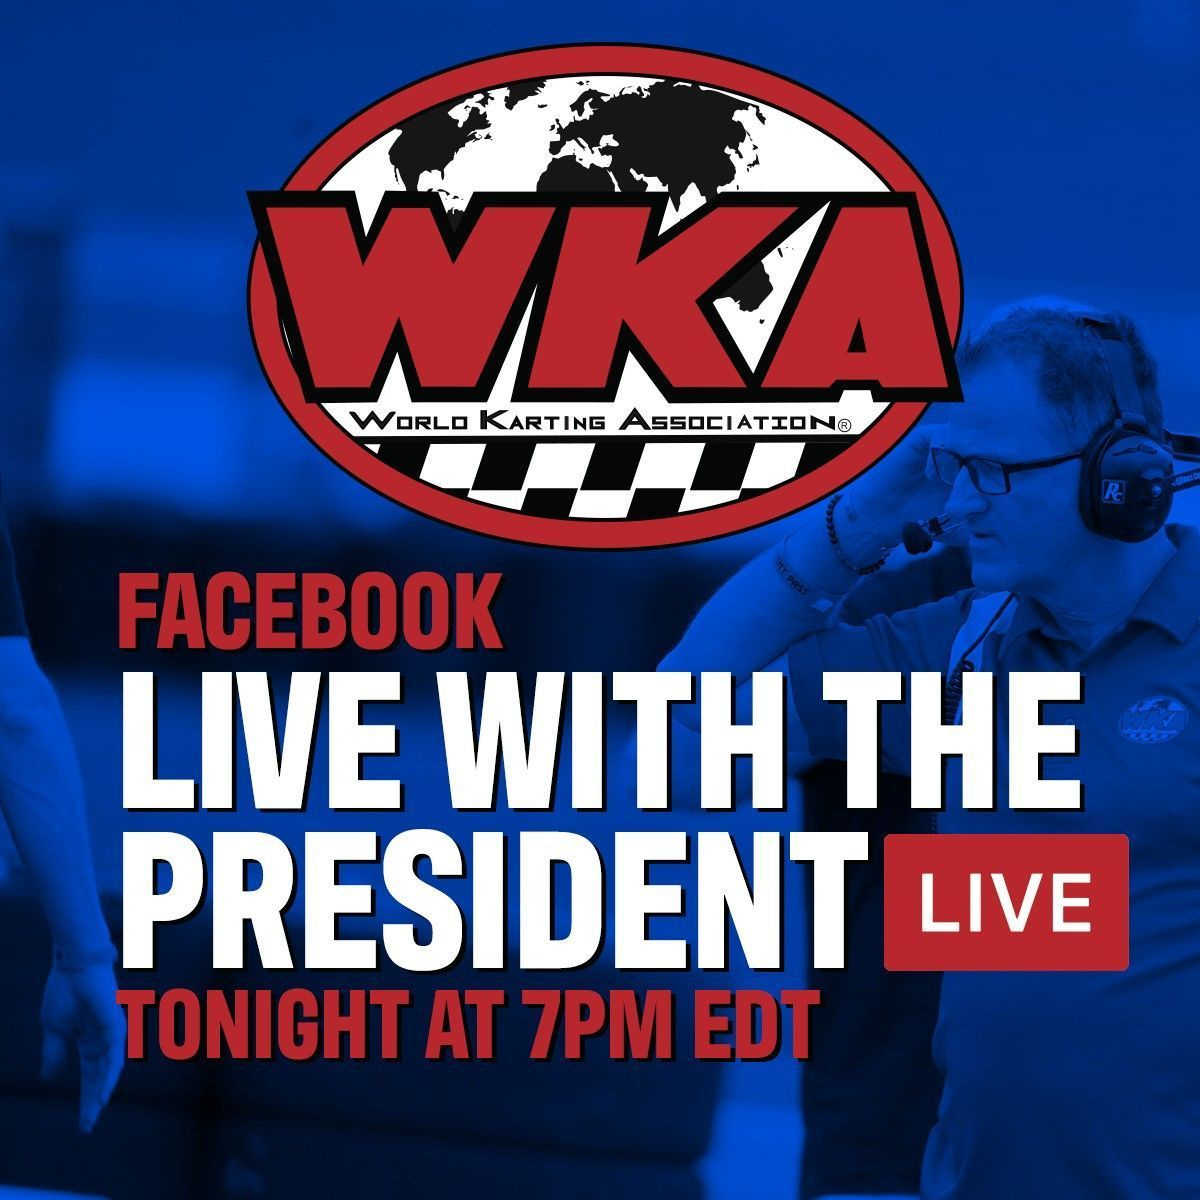 One hour to our 3rd Thursdays Facebook Live with WKA President Kevin Williams. Be sure to tune in at 7pm EDT! #WKA #WorldKarting #WorldKartingAssociation #Karting #Kart #Racing #Motorsport #LetsGoKarting #MoreKarting #Facebook #FacebookLive